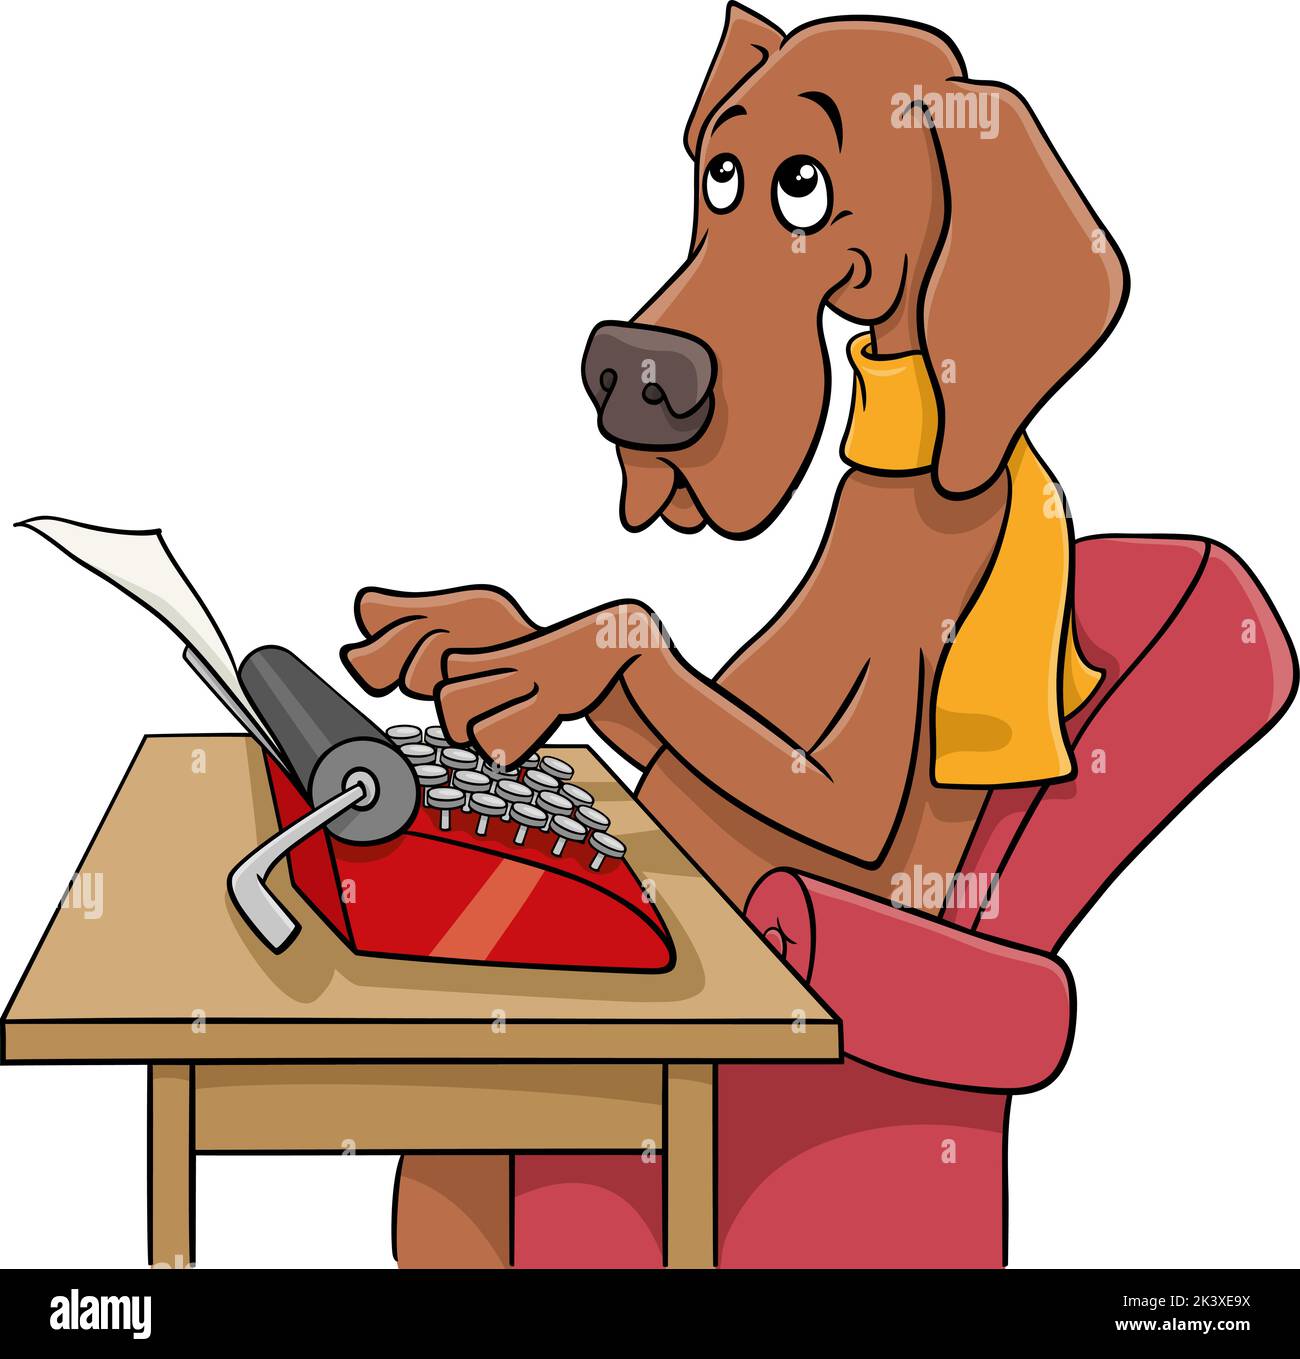 Cartoon illustration of the writer or poet dog with typewriter Stock Vector